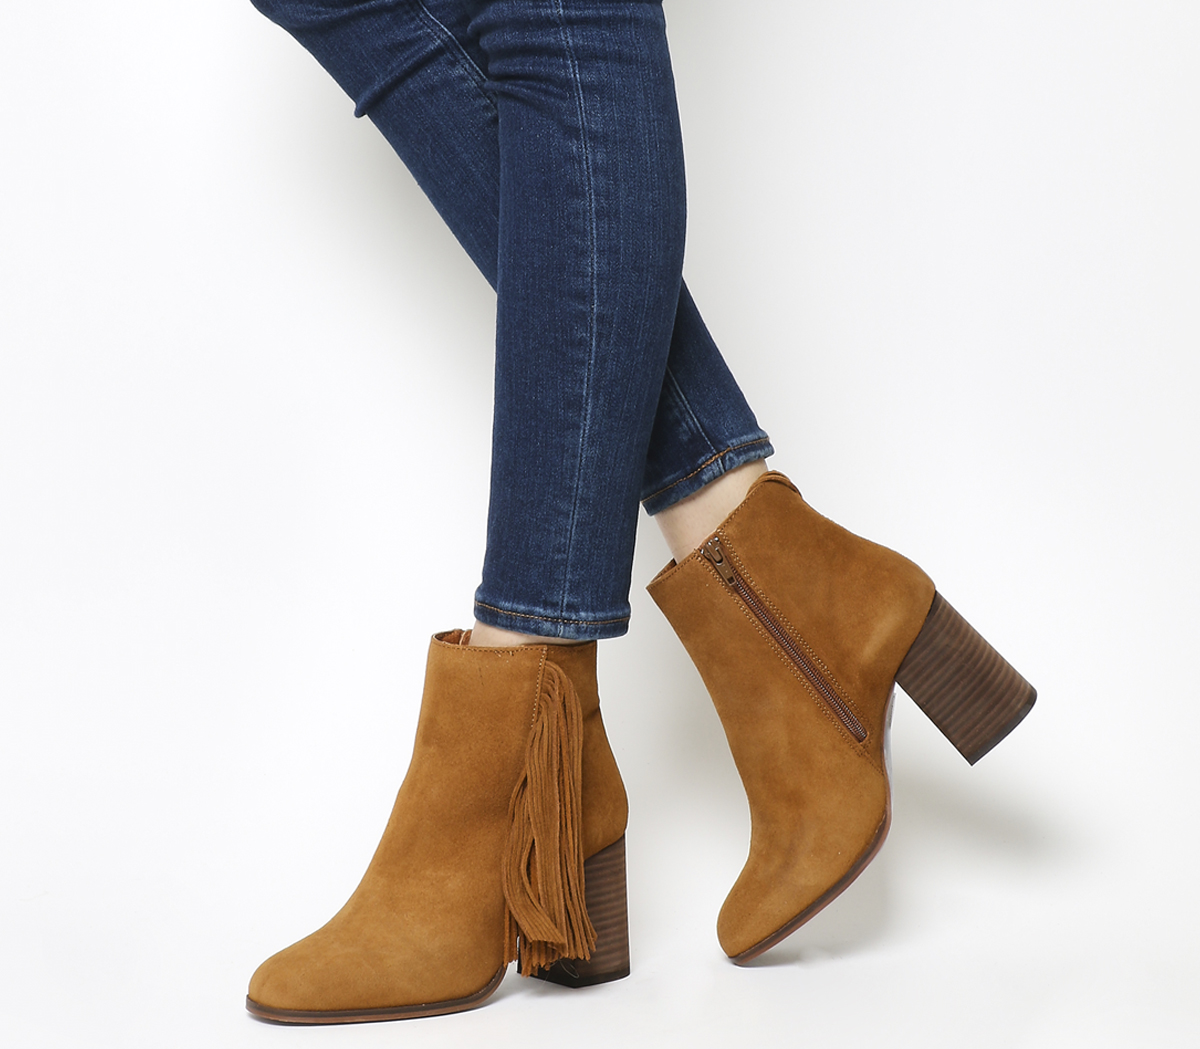 OFFICEIdeally Square Toe Fringe BootsTan Suede